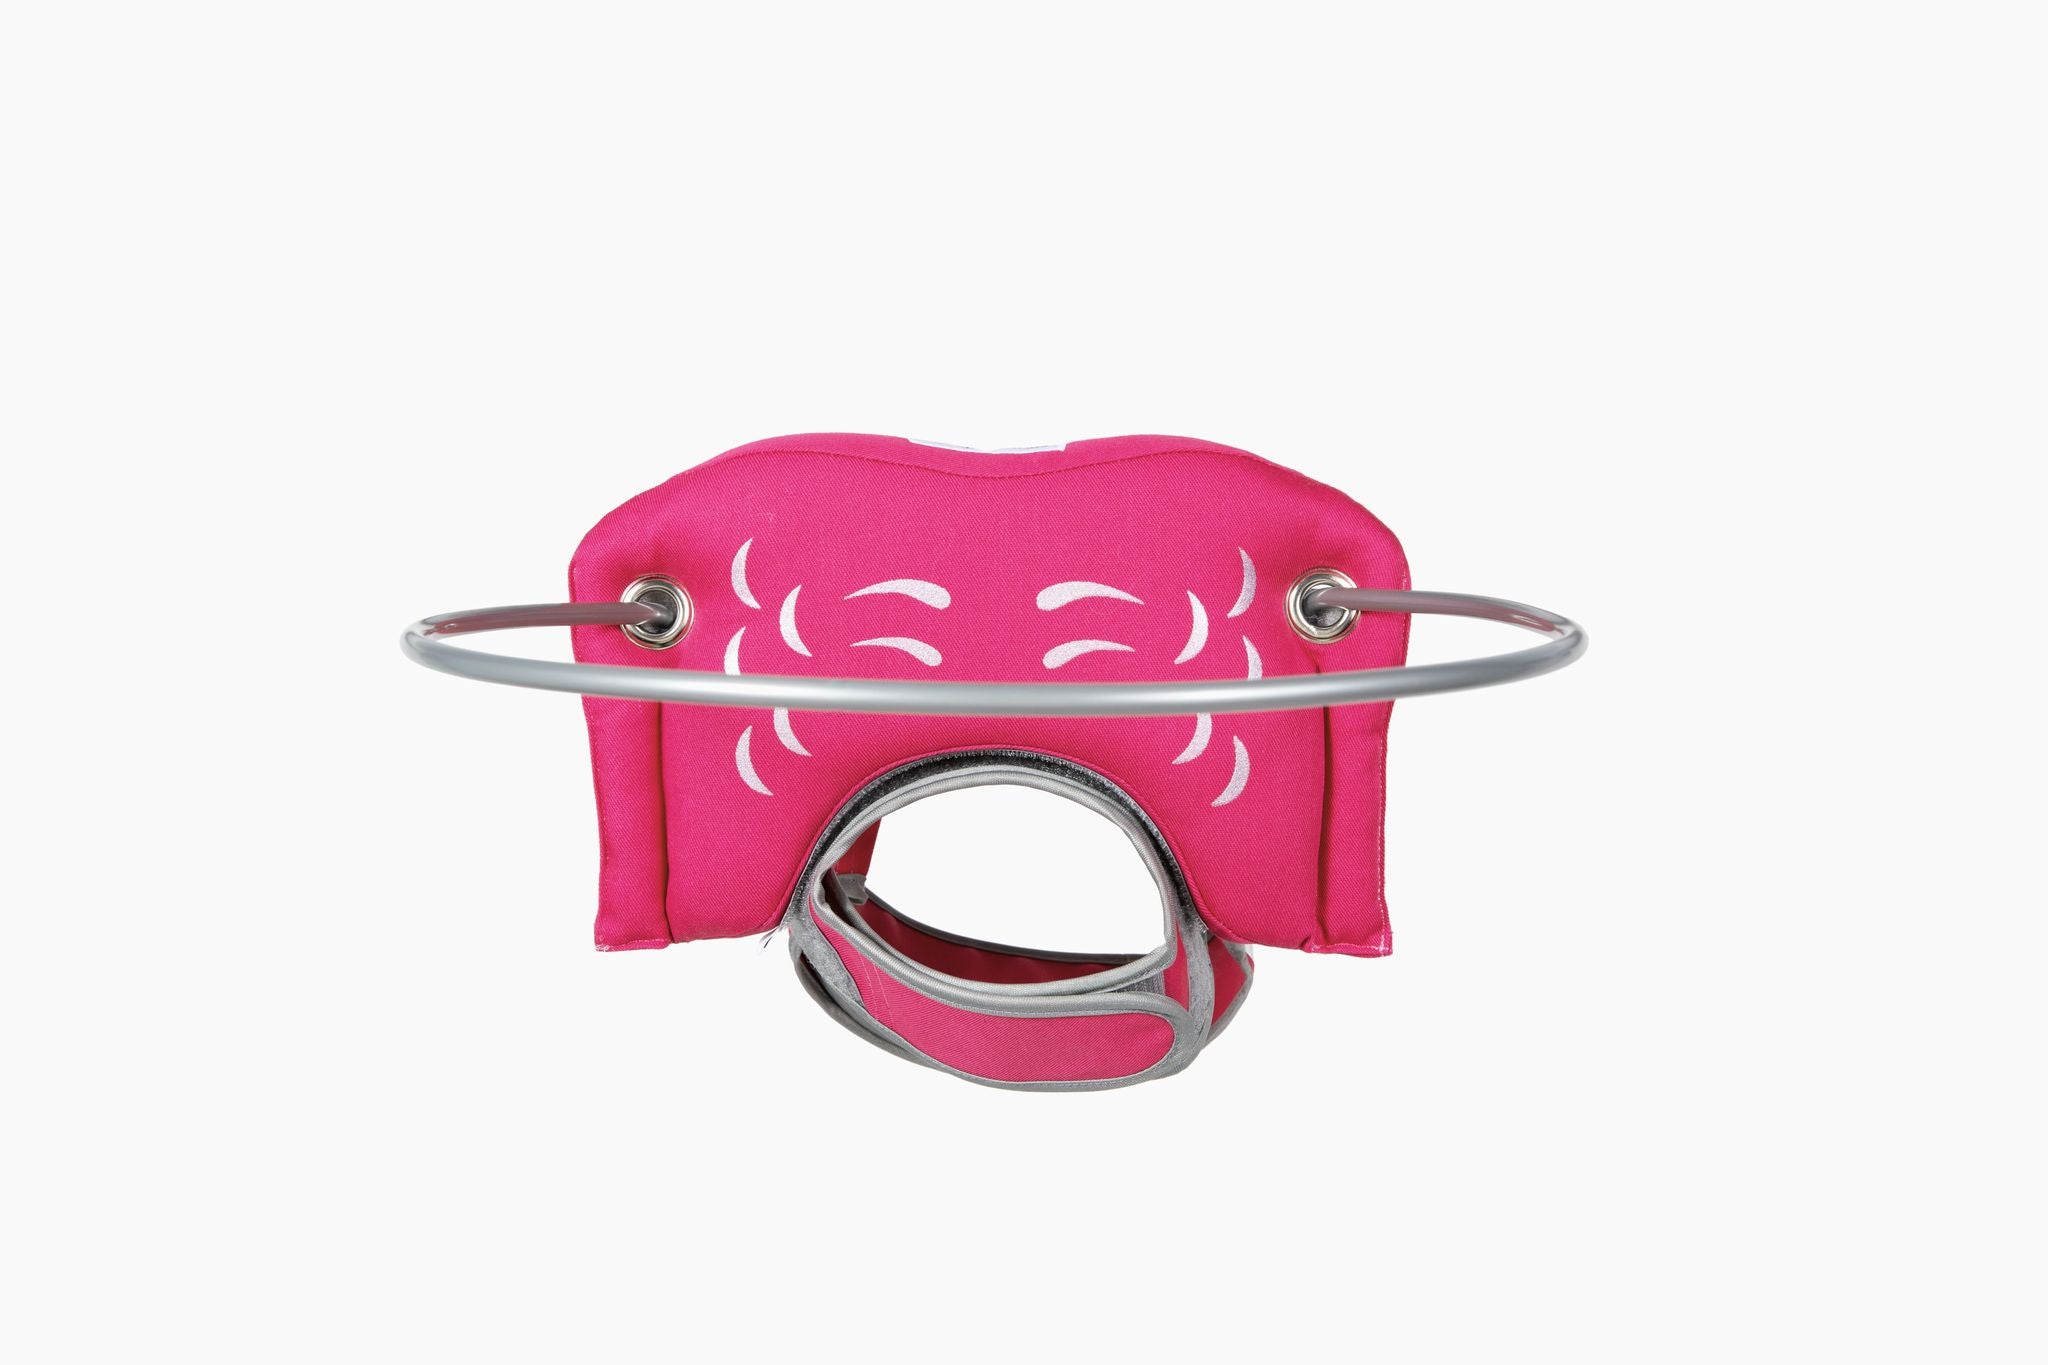 Muffin's Halo Blind Dog Guide - Pink - Size 3